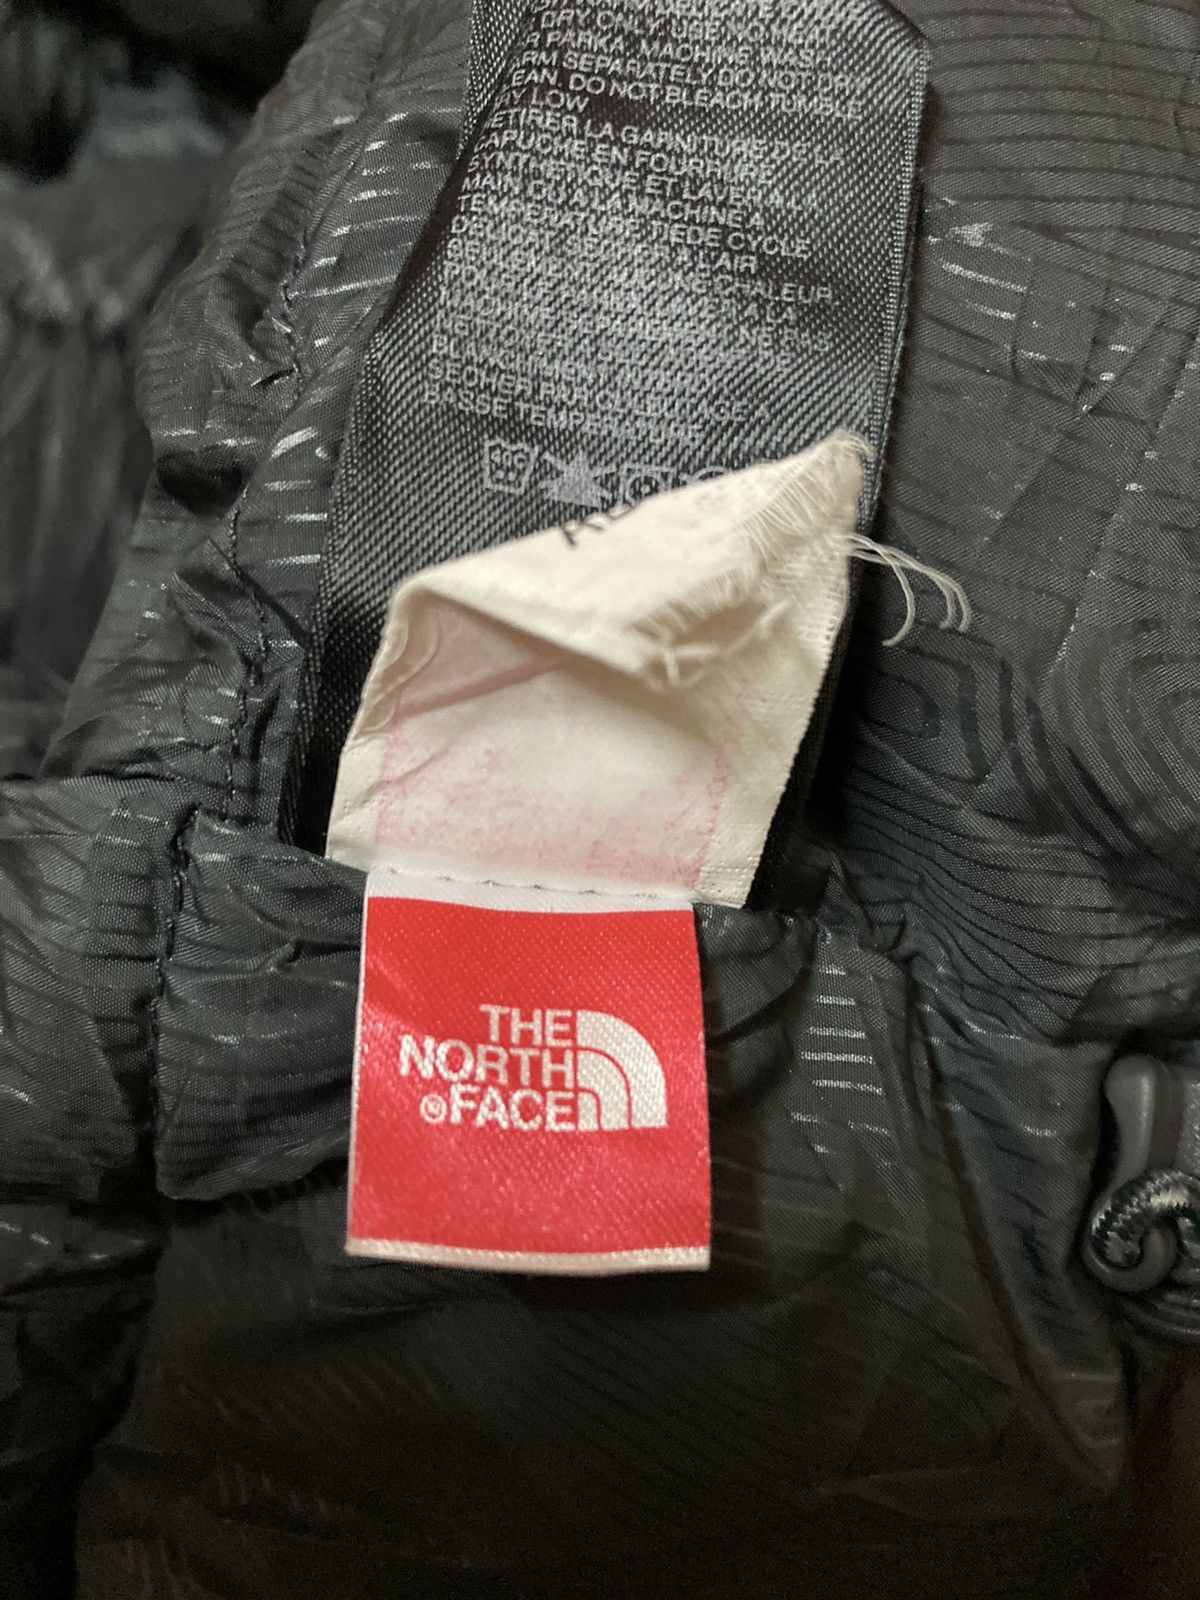 The North Face Hyvent TNF NSE F07 Parka Down Jacket - 21